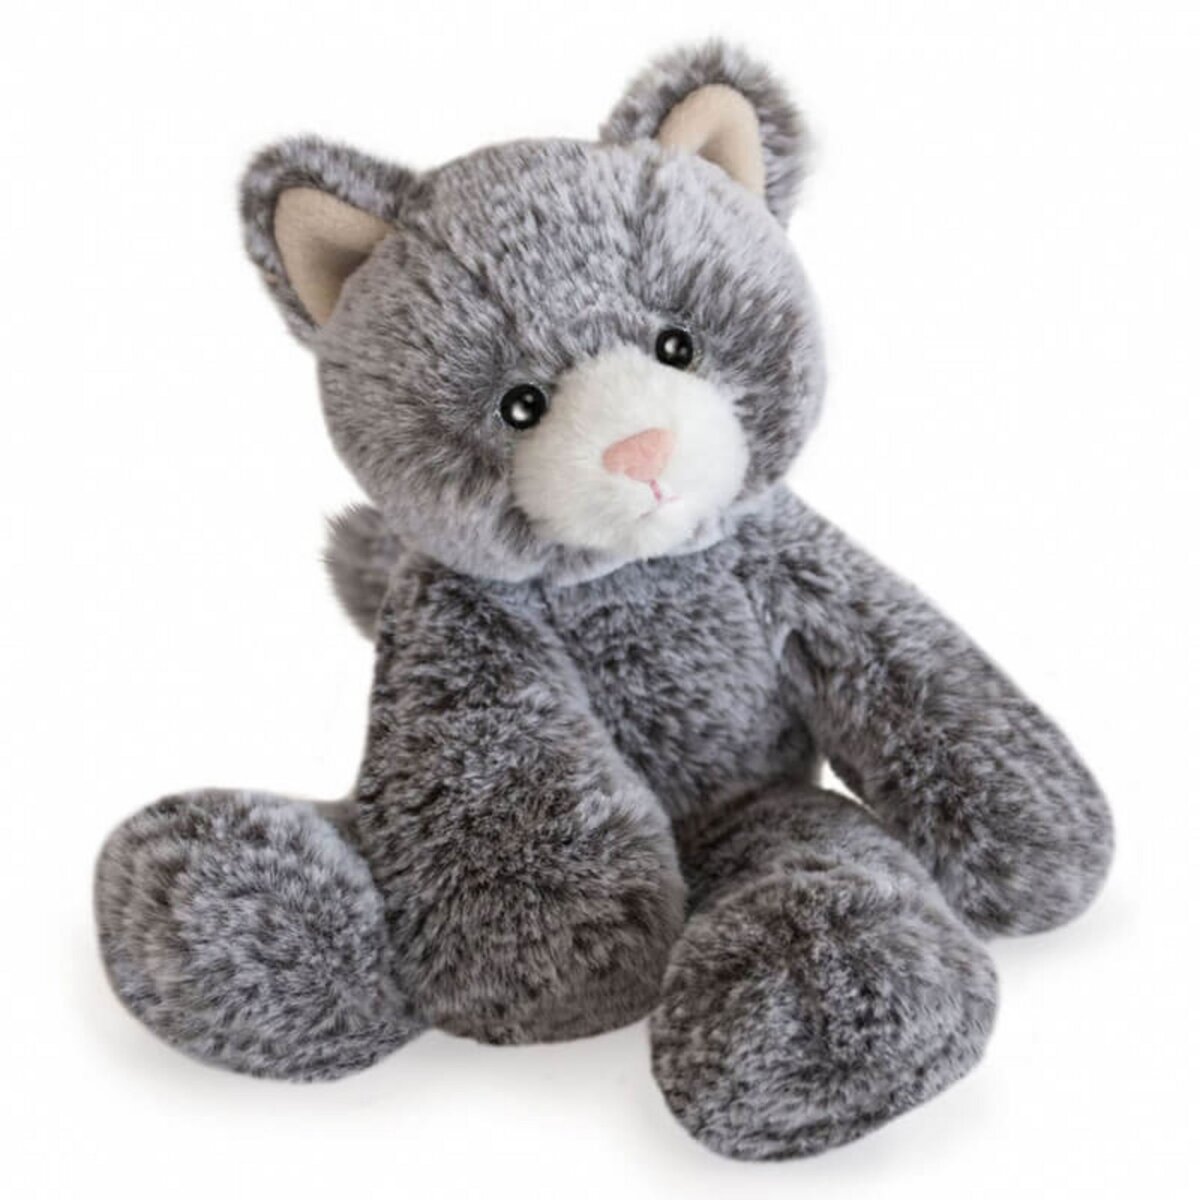 Histoire D'Ours Peluche sweety ours histoire d ours pas cher 